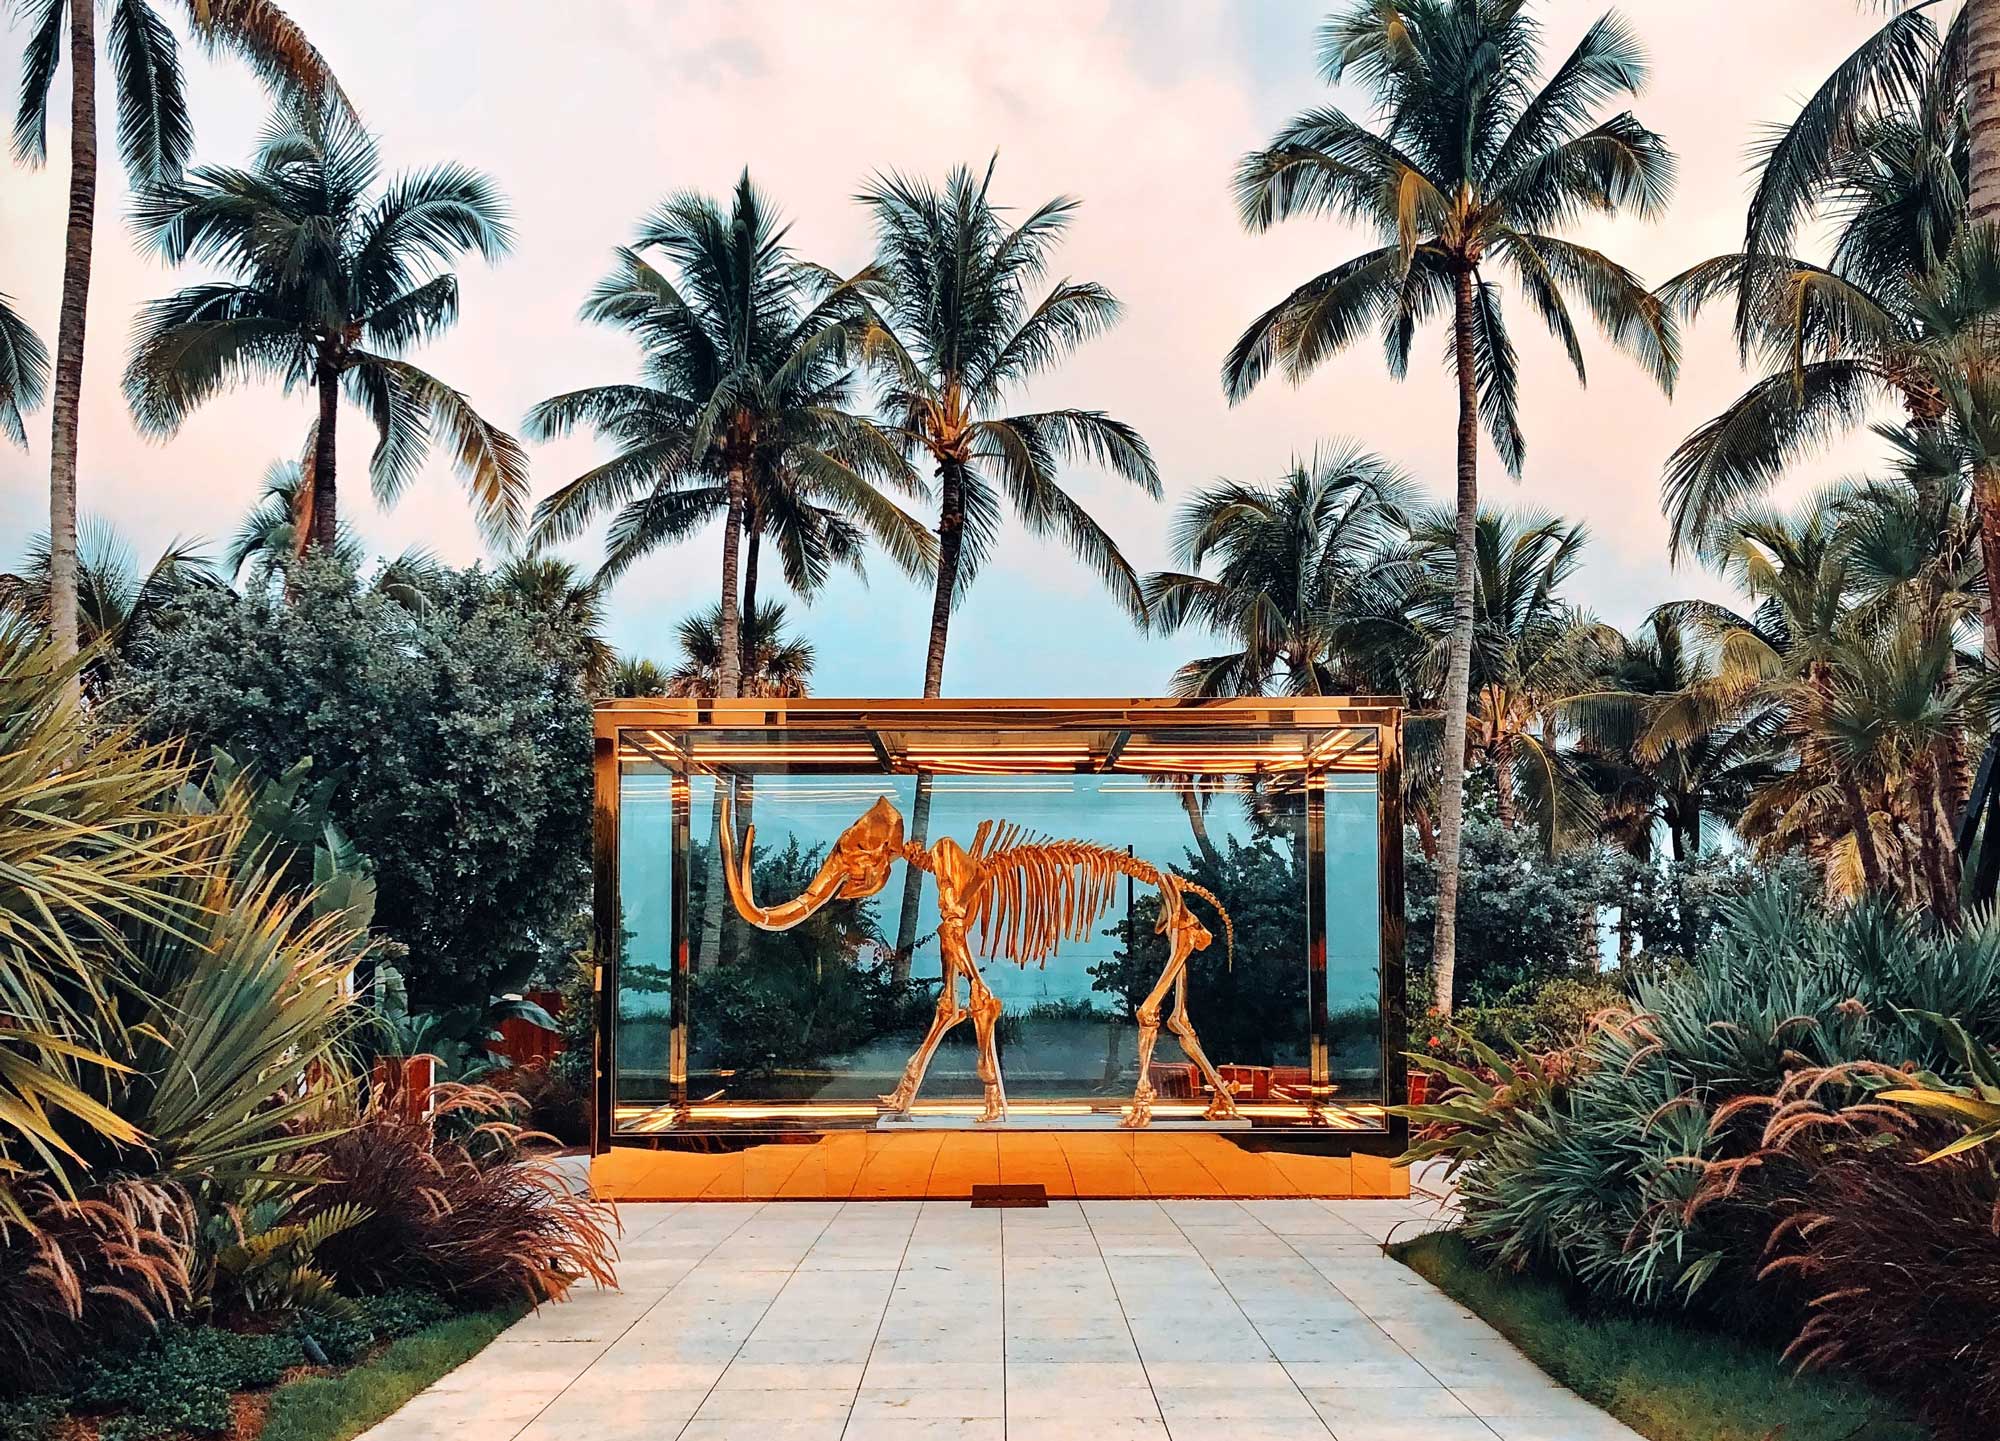 Miami Florida landscape showcasing a dinosaur in display around palm tress and bushes.